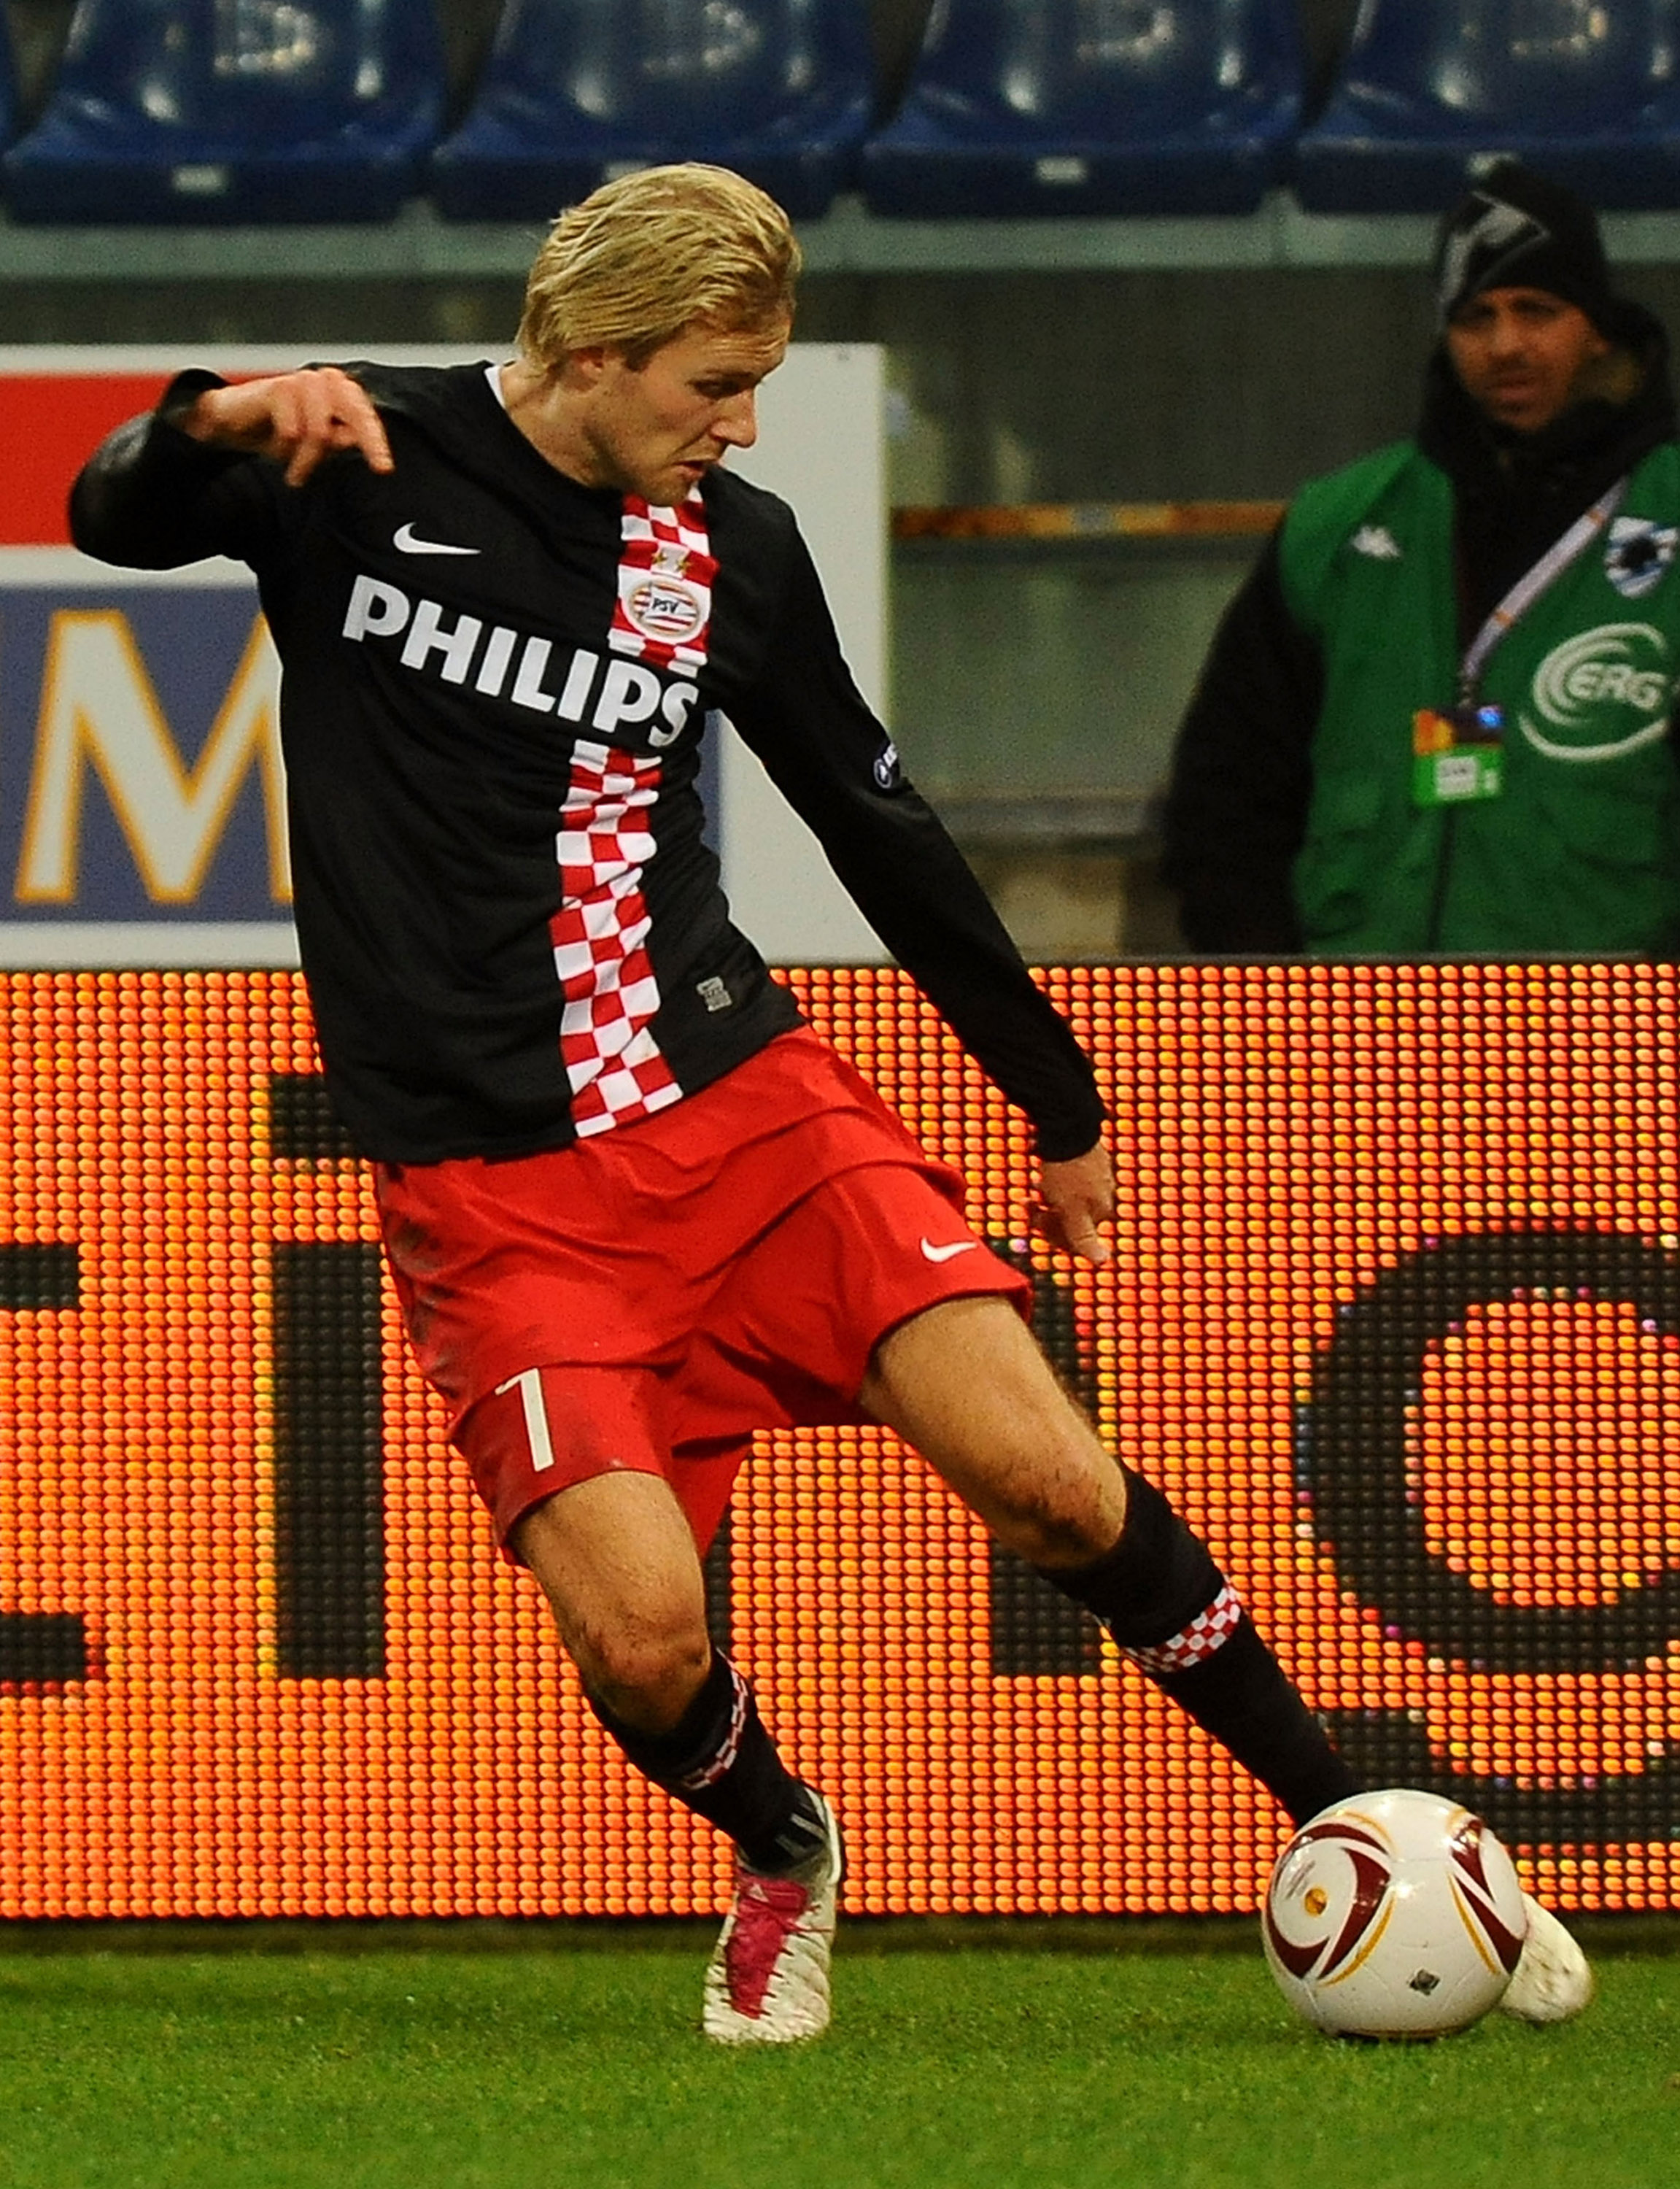 GENOA, ITALY - DECEMBER 01: Ola Toivonen of PSV Eindhoven in action during the UEFA Europa League Group I match between Sampdoria and PSV Eindhoven at Stadio Luigi Ferraris on December 1, 2010 in Genoa, Italy.  (Photo by Massimo Cebrelli/Getty Images)